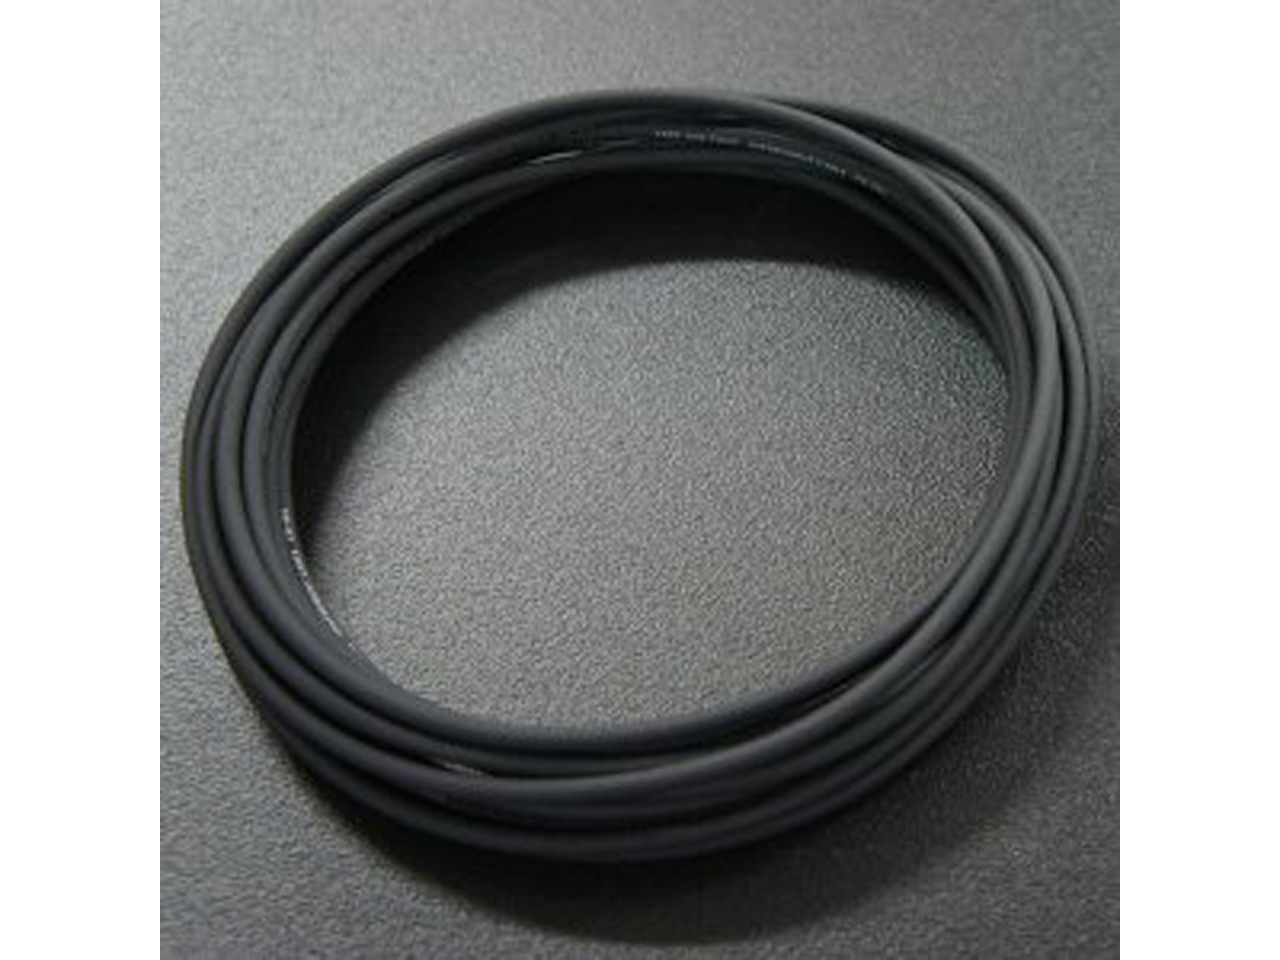 FREE THE TONE(フリーザトーン) Solderless Cable CU-416 / 1m